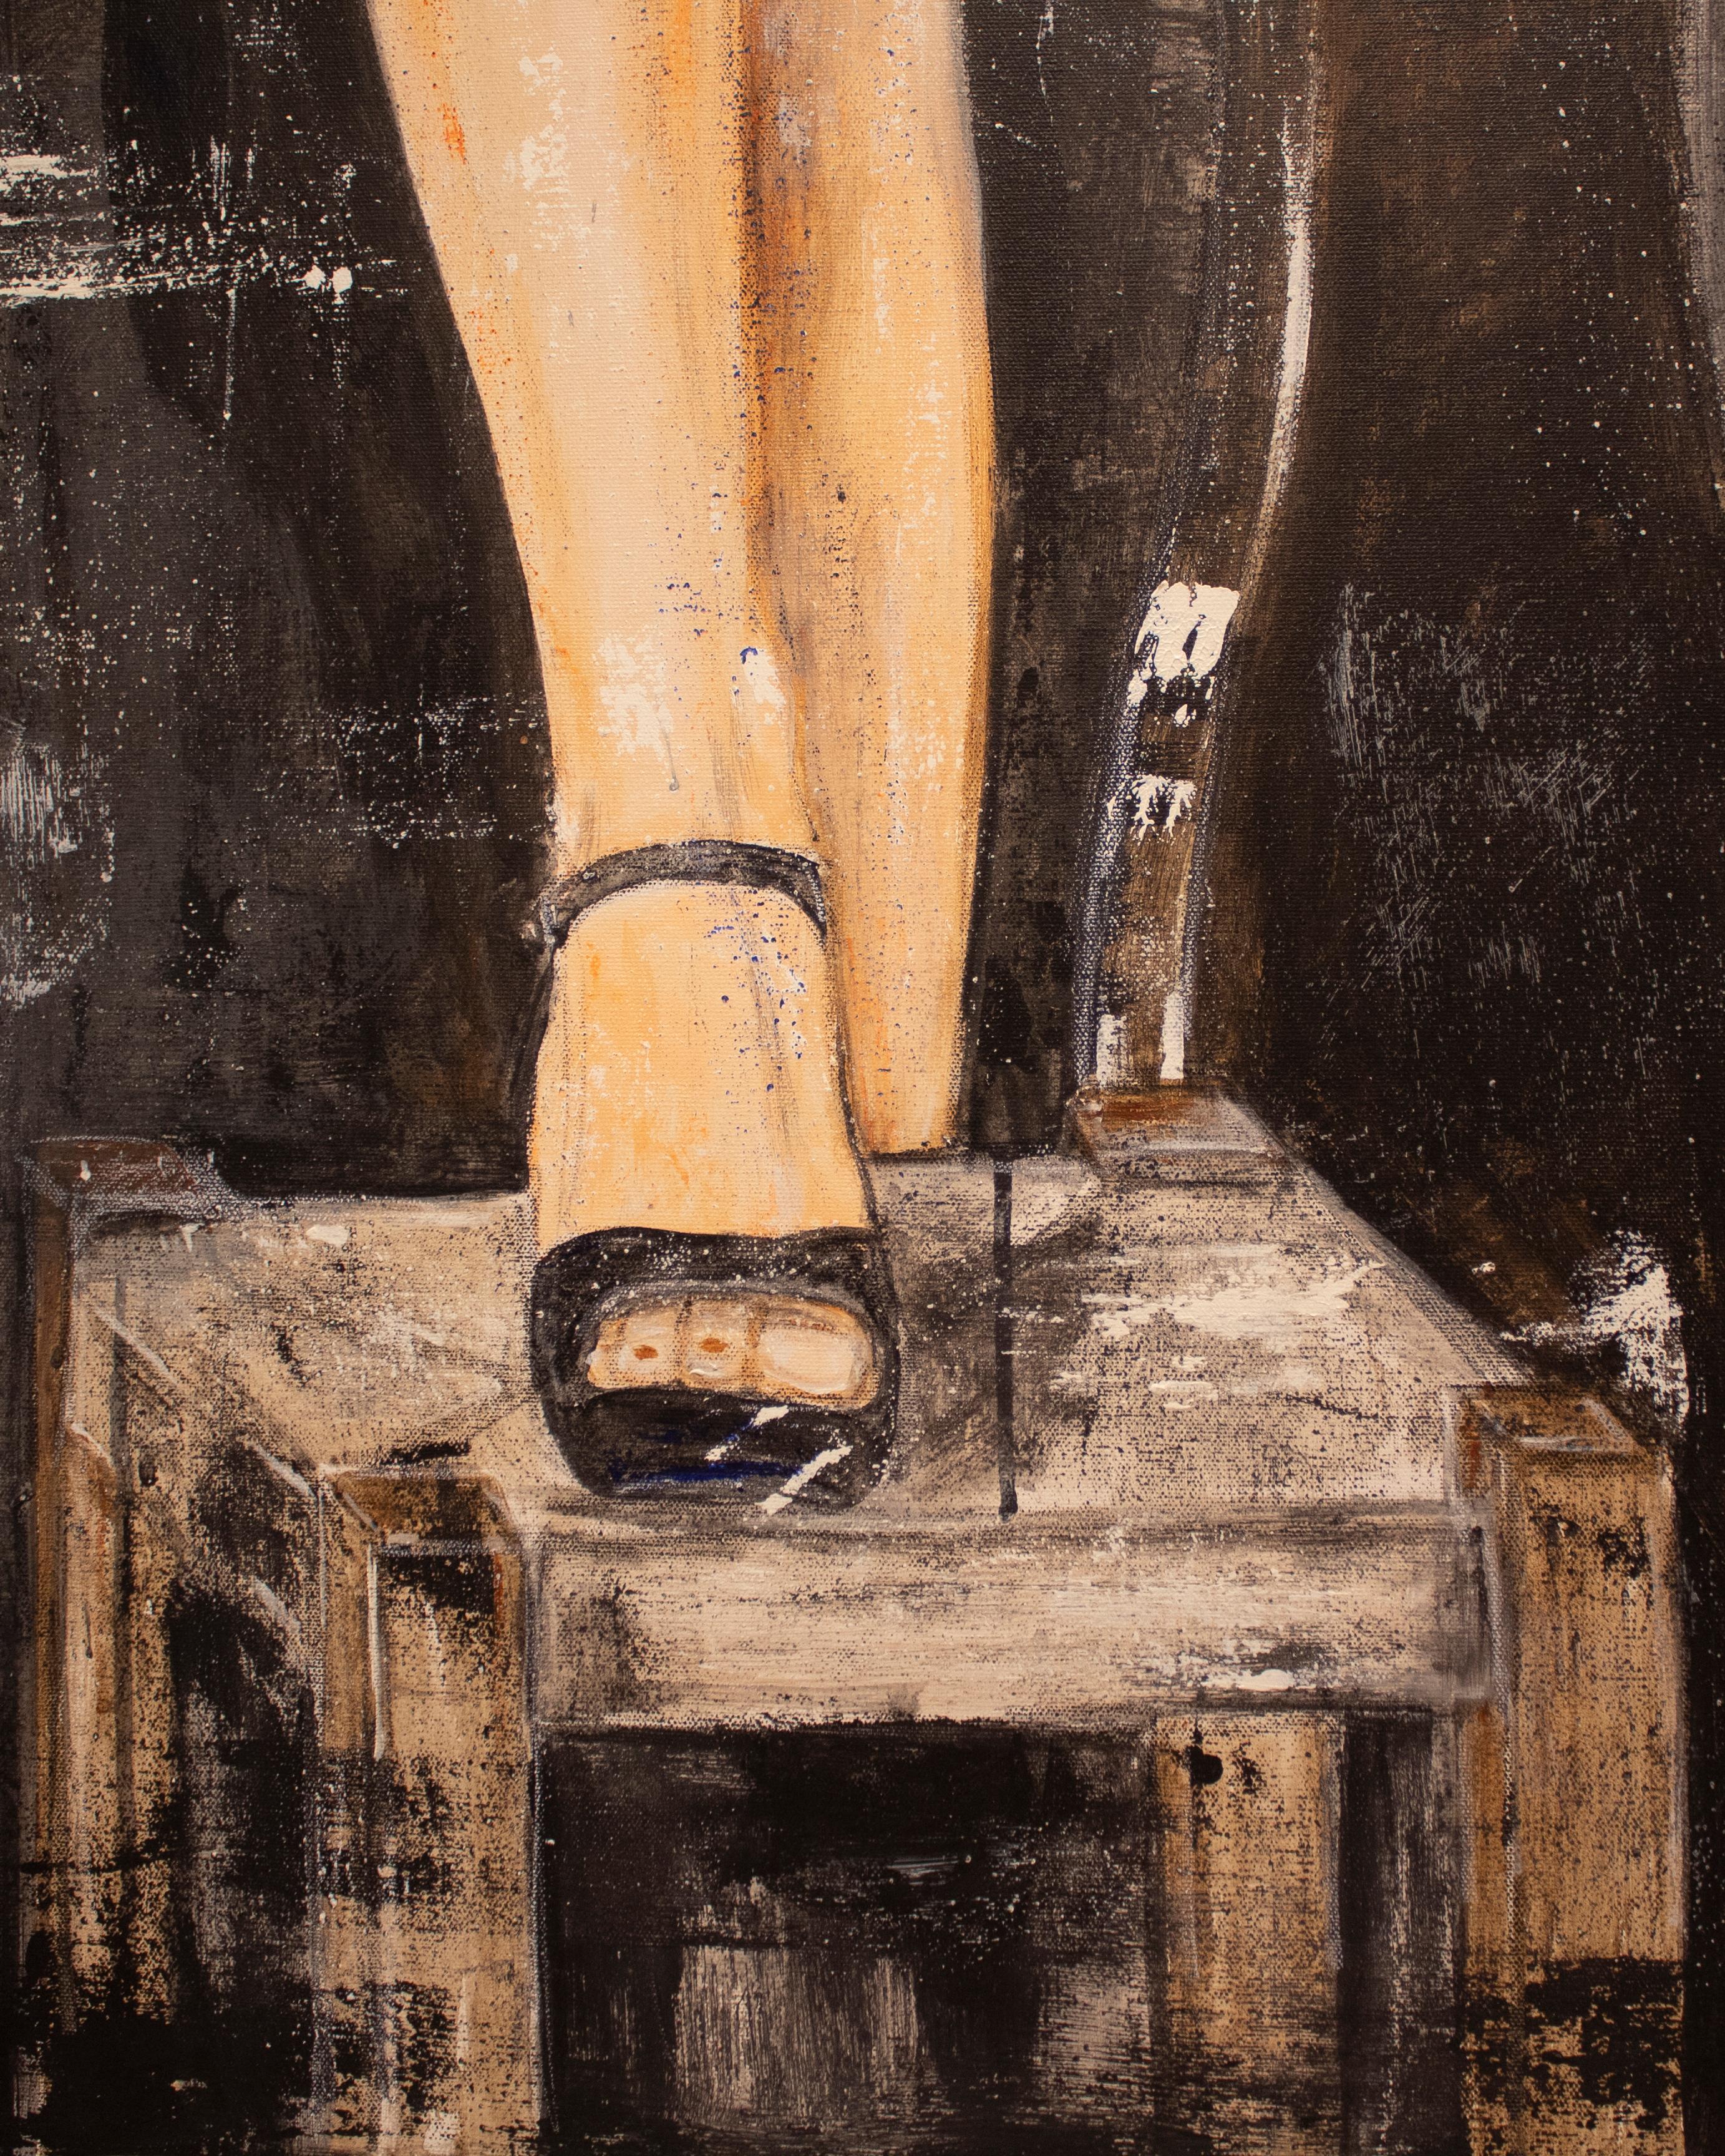 Painting by Sofia Simões, drinking with friends, acrylic on canvas, 2018. The work features a woman in a bar, sitting on a table and with one foot resting on a bench. Signed in the lower right corner, “Sofia Simões”.